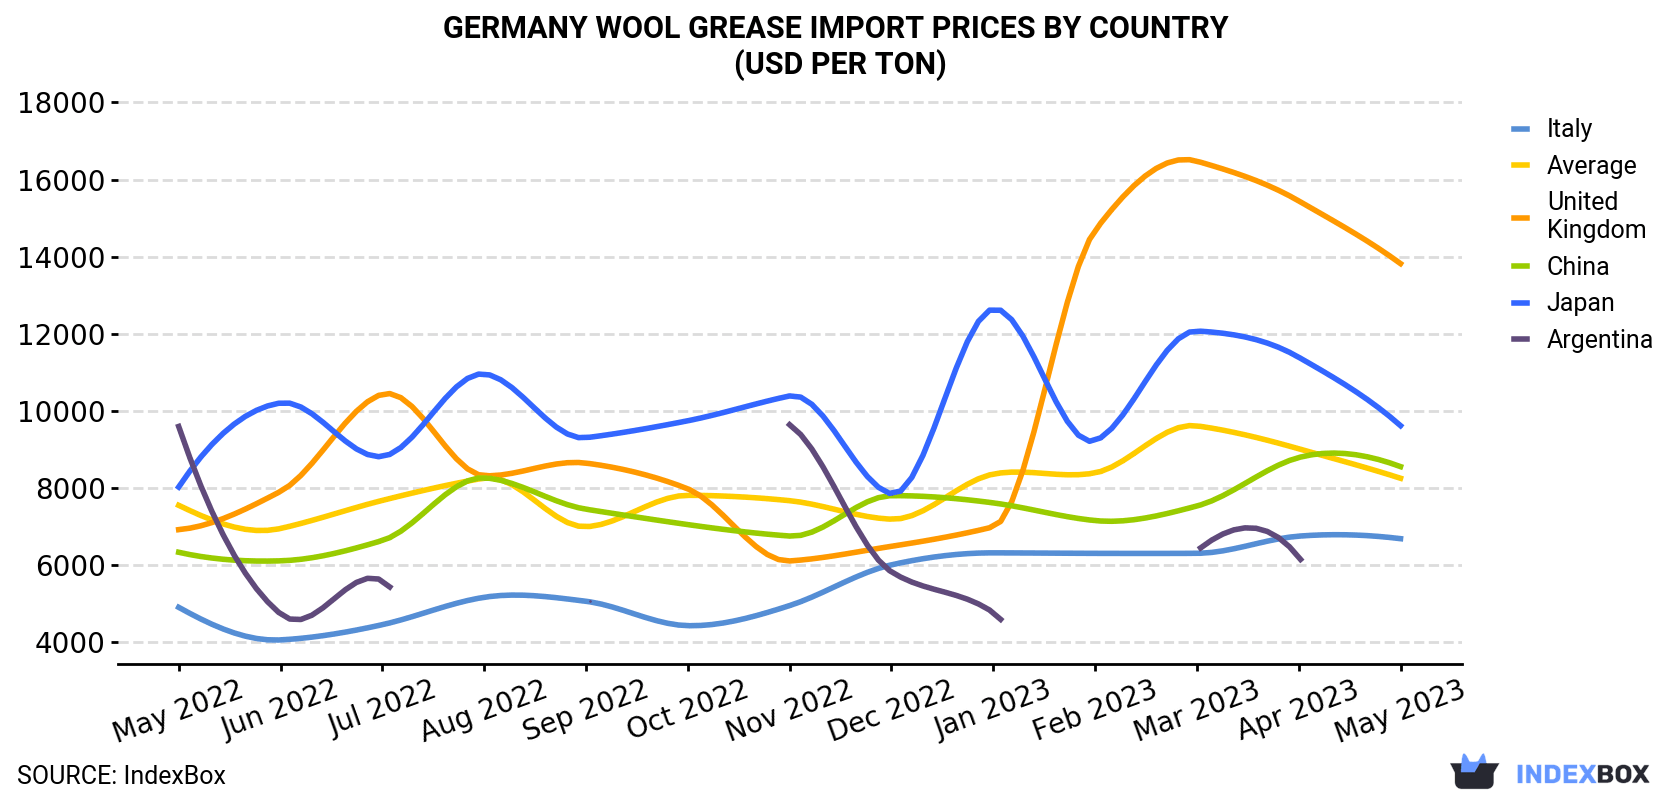 Germany Wool Grease Import Prices By Country (USD Per Ton)